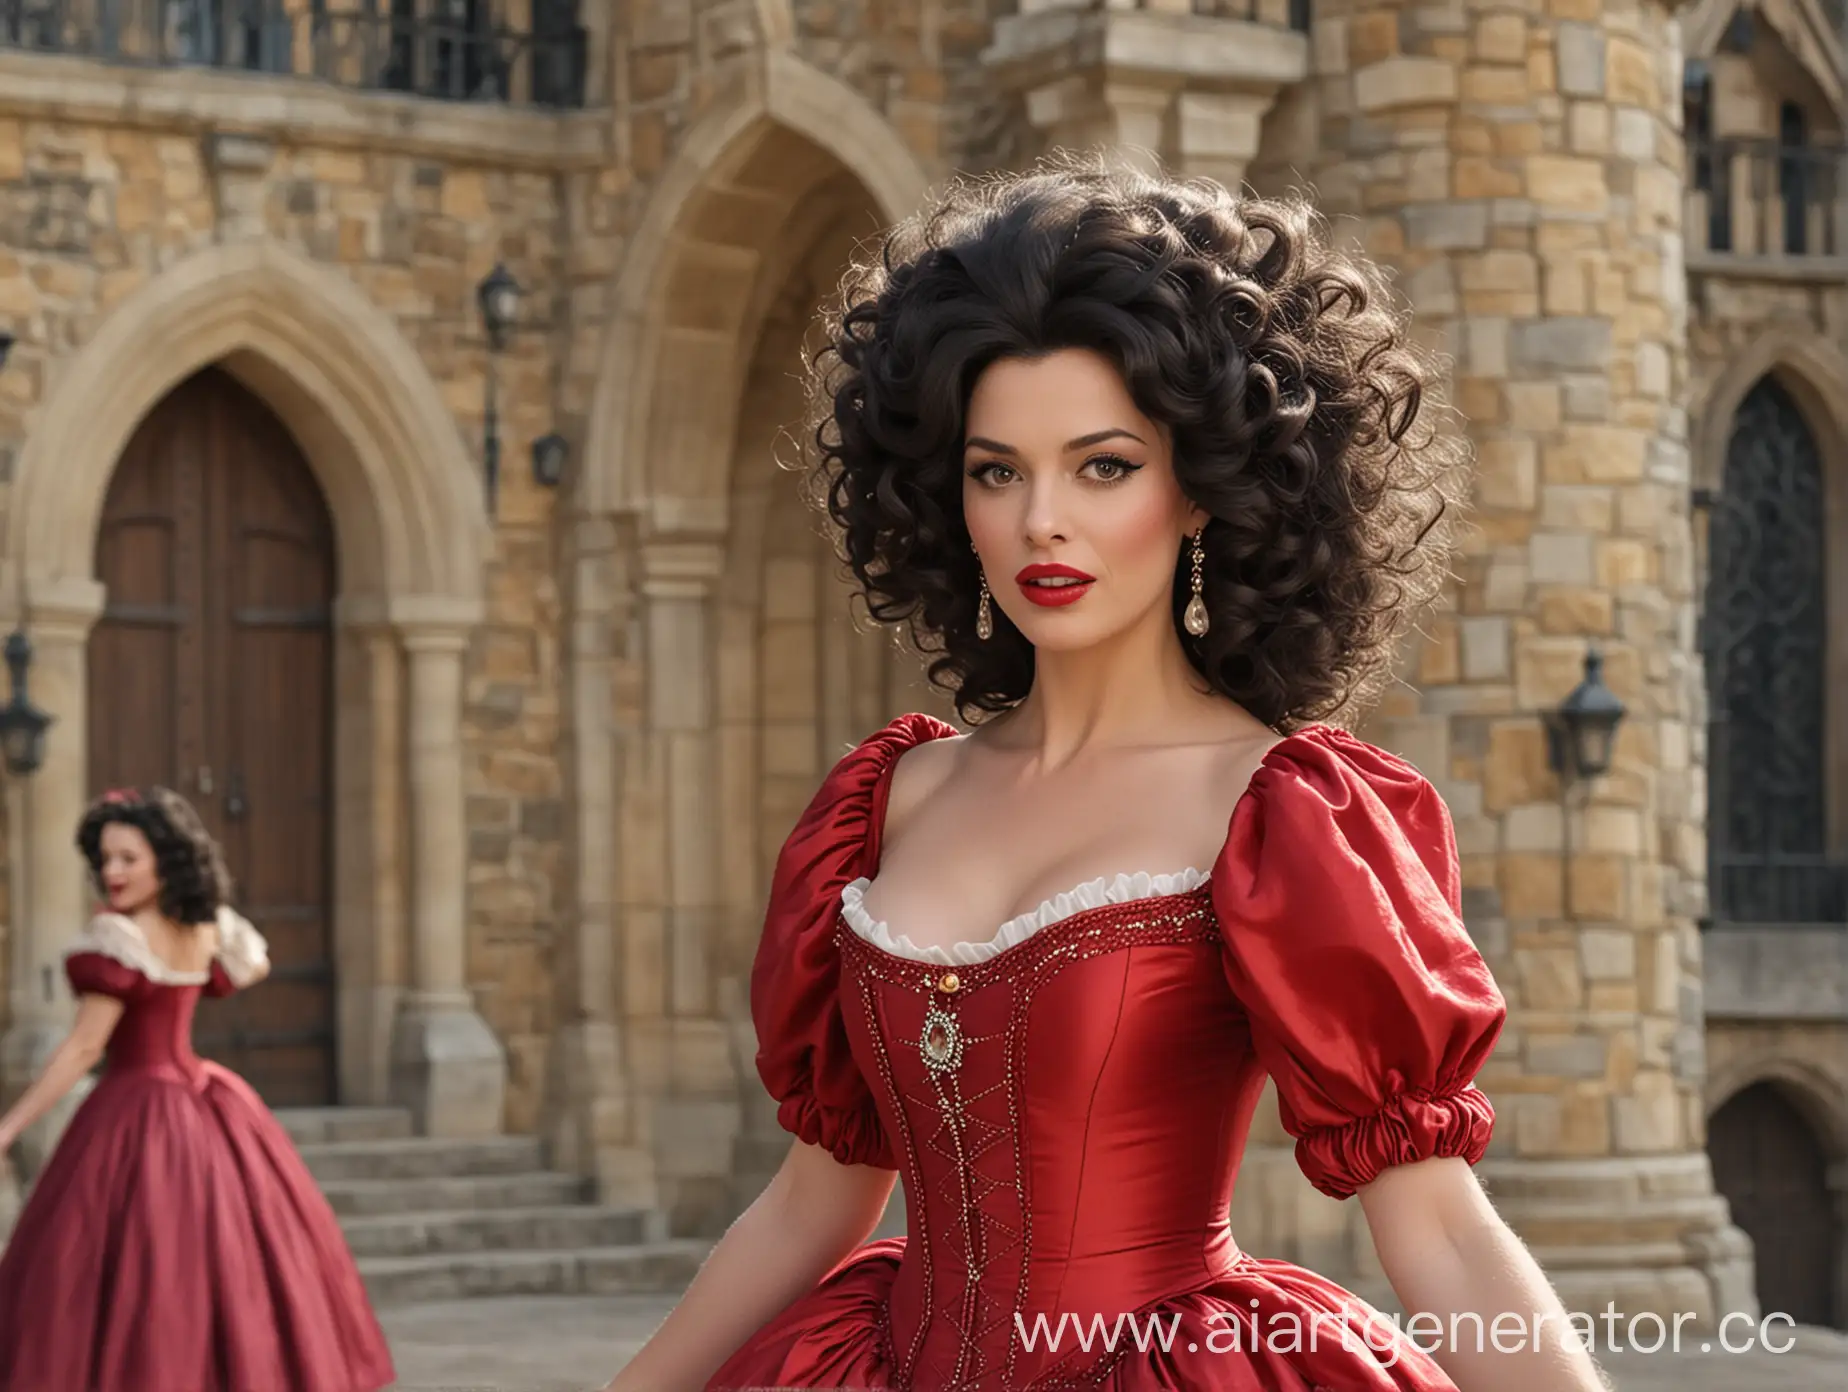 Elegant-Royal-Dance-Clementianna-in-Red-Fluffy-Dress-Snow-White-and-the-Seven-Dwarfs-2012